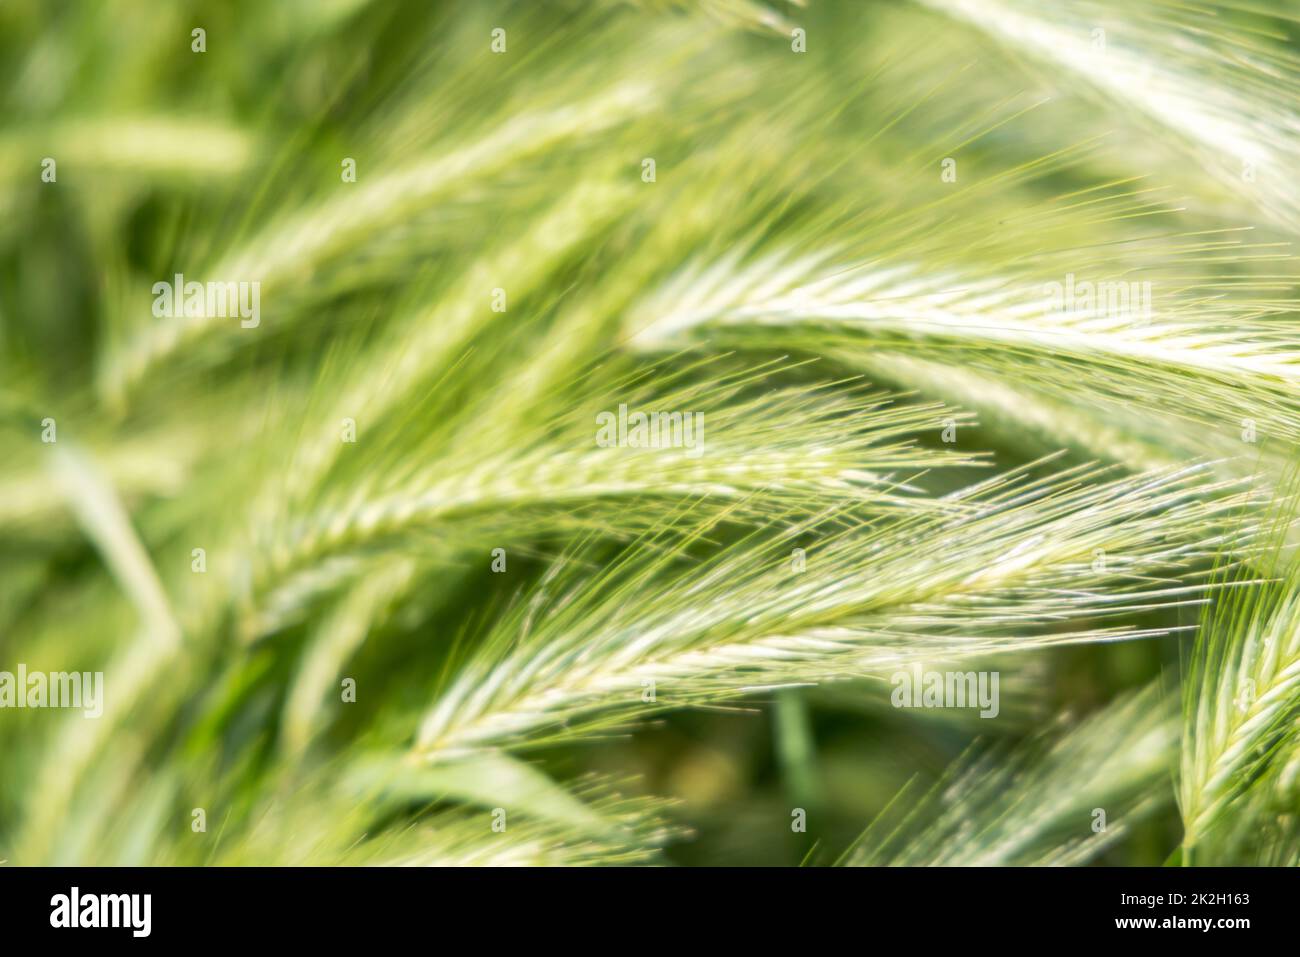 Wheat field. A close up of an ear of rye. Food crisis and hunger during the war Stock Photo